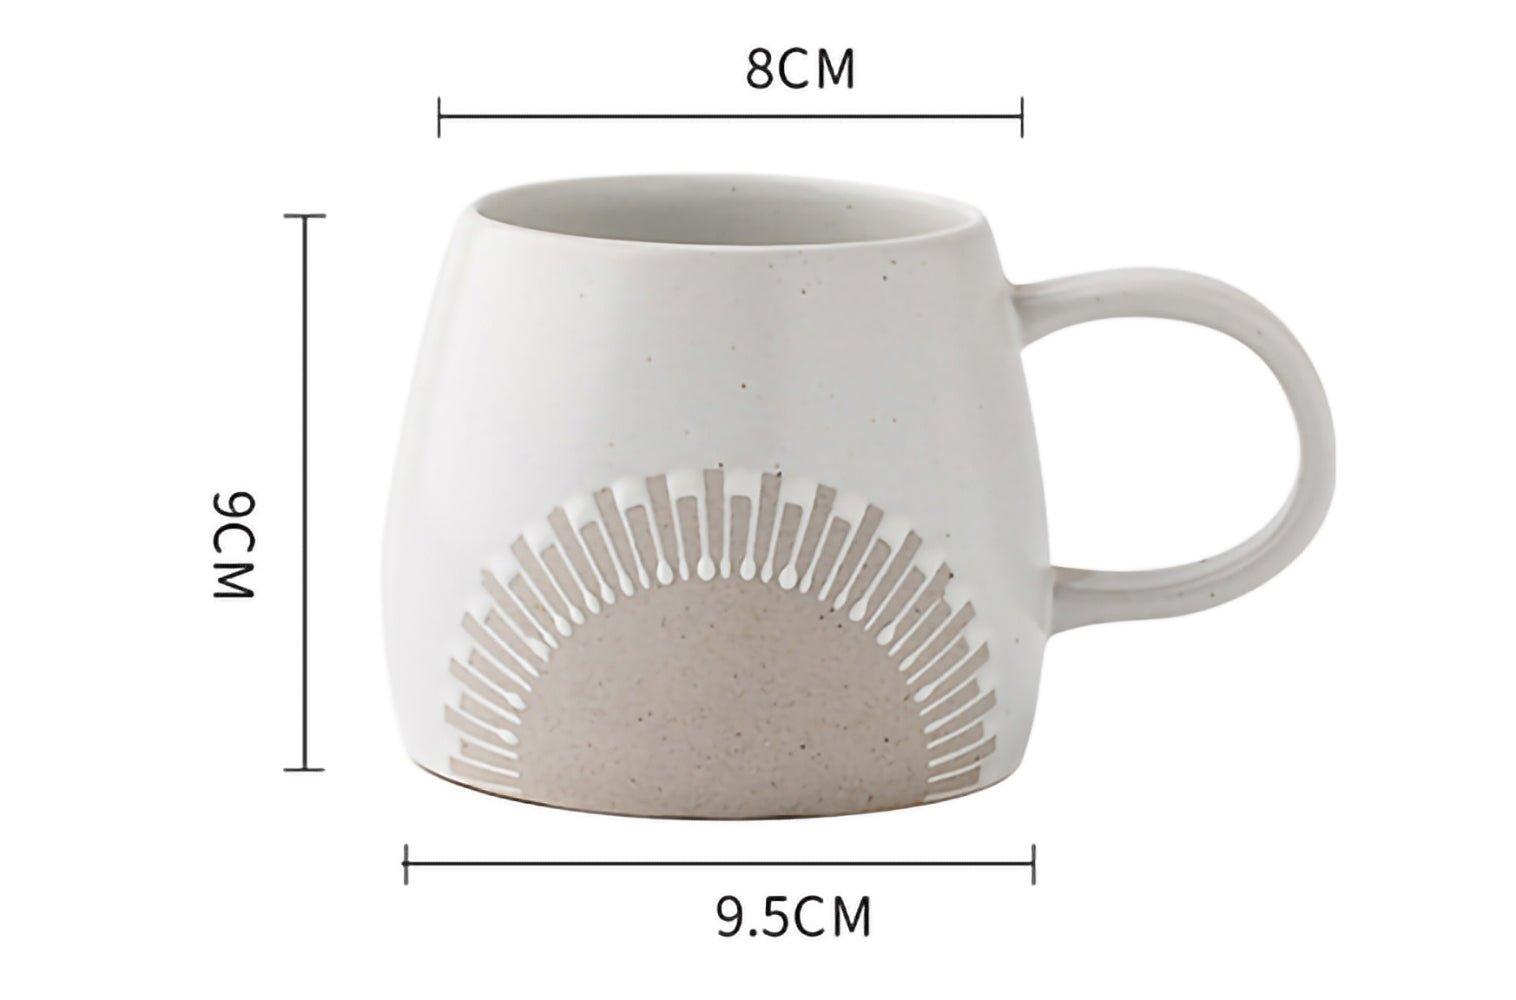 Aesthetic Vintage Coffee Mug Cup │ Ceramic High Temperature Resistance Big Belly Cup │ Kitchenware - Besontique